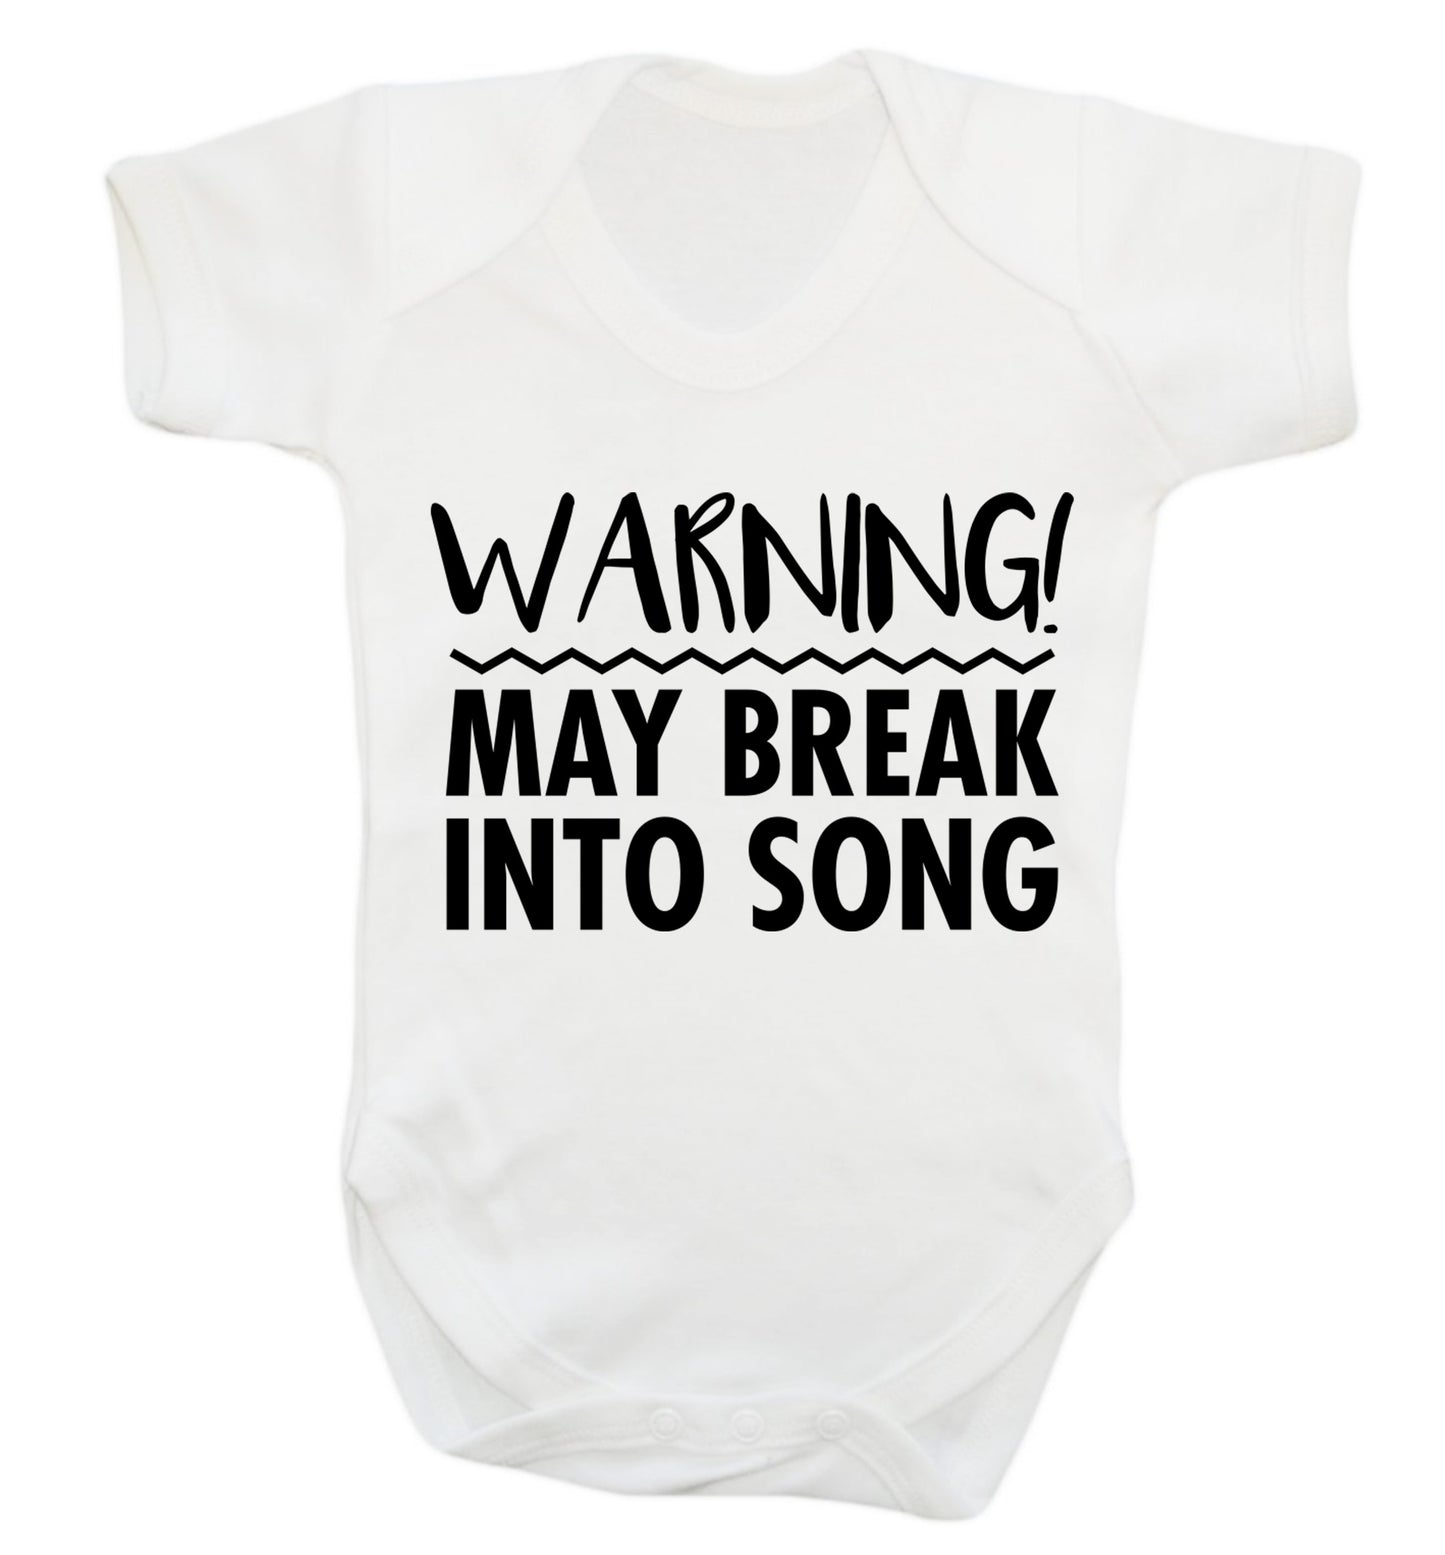 Warning may break into song Baby Vest white 18-24 months